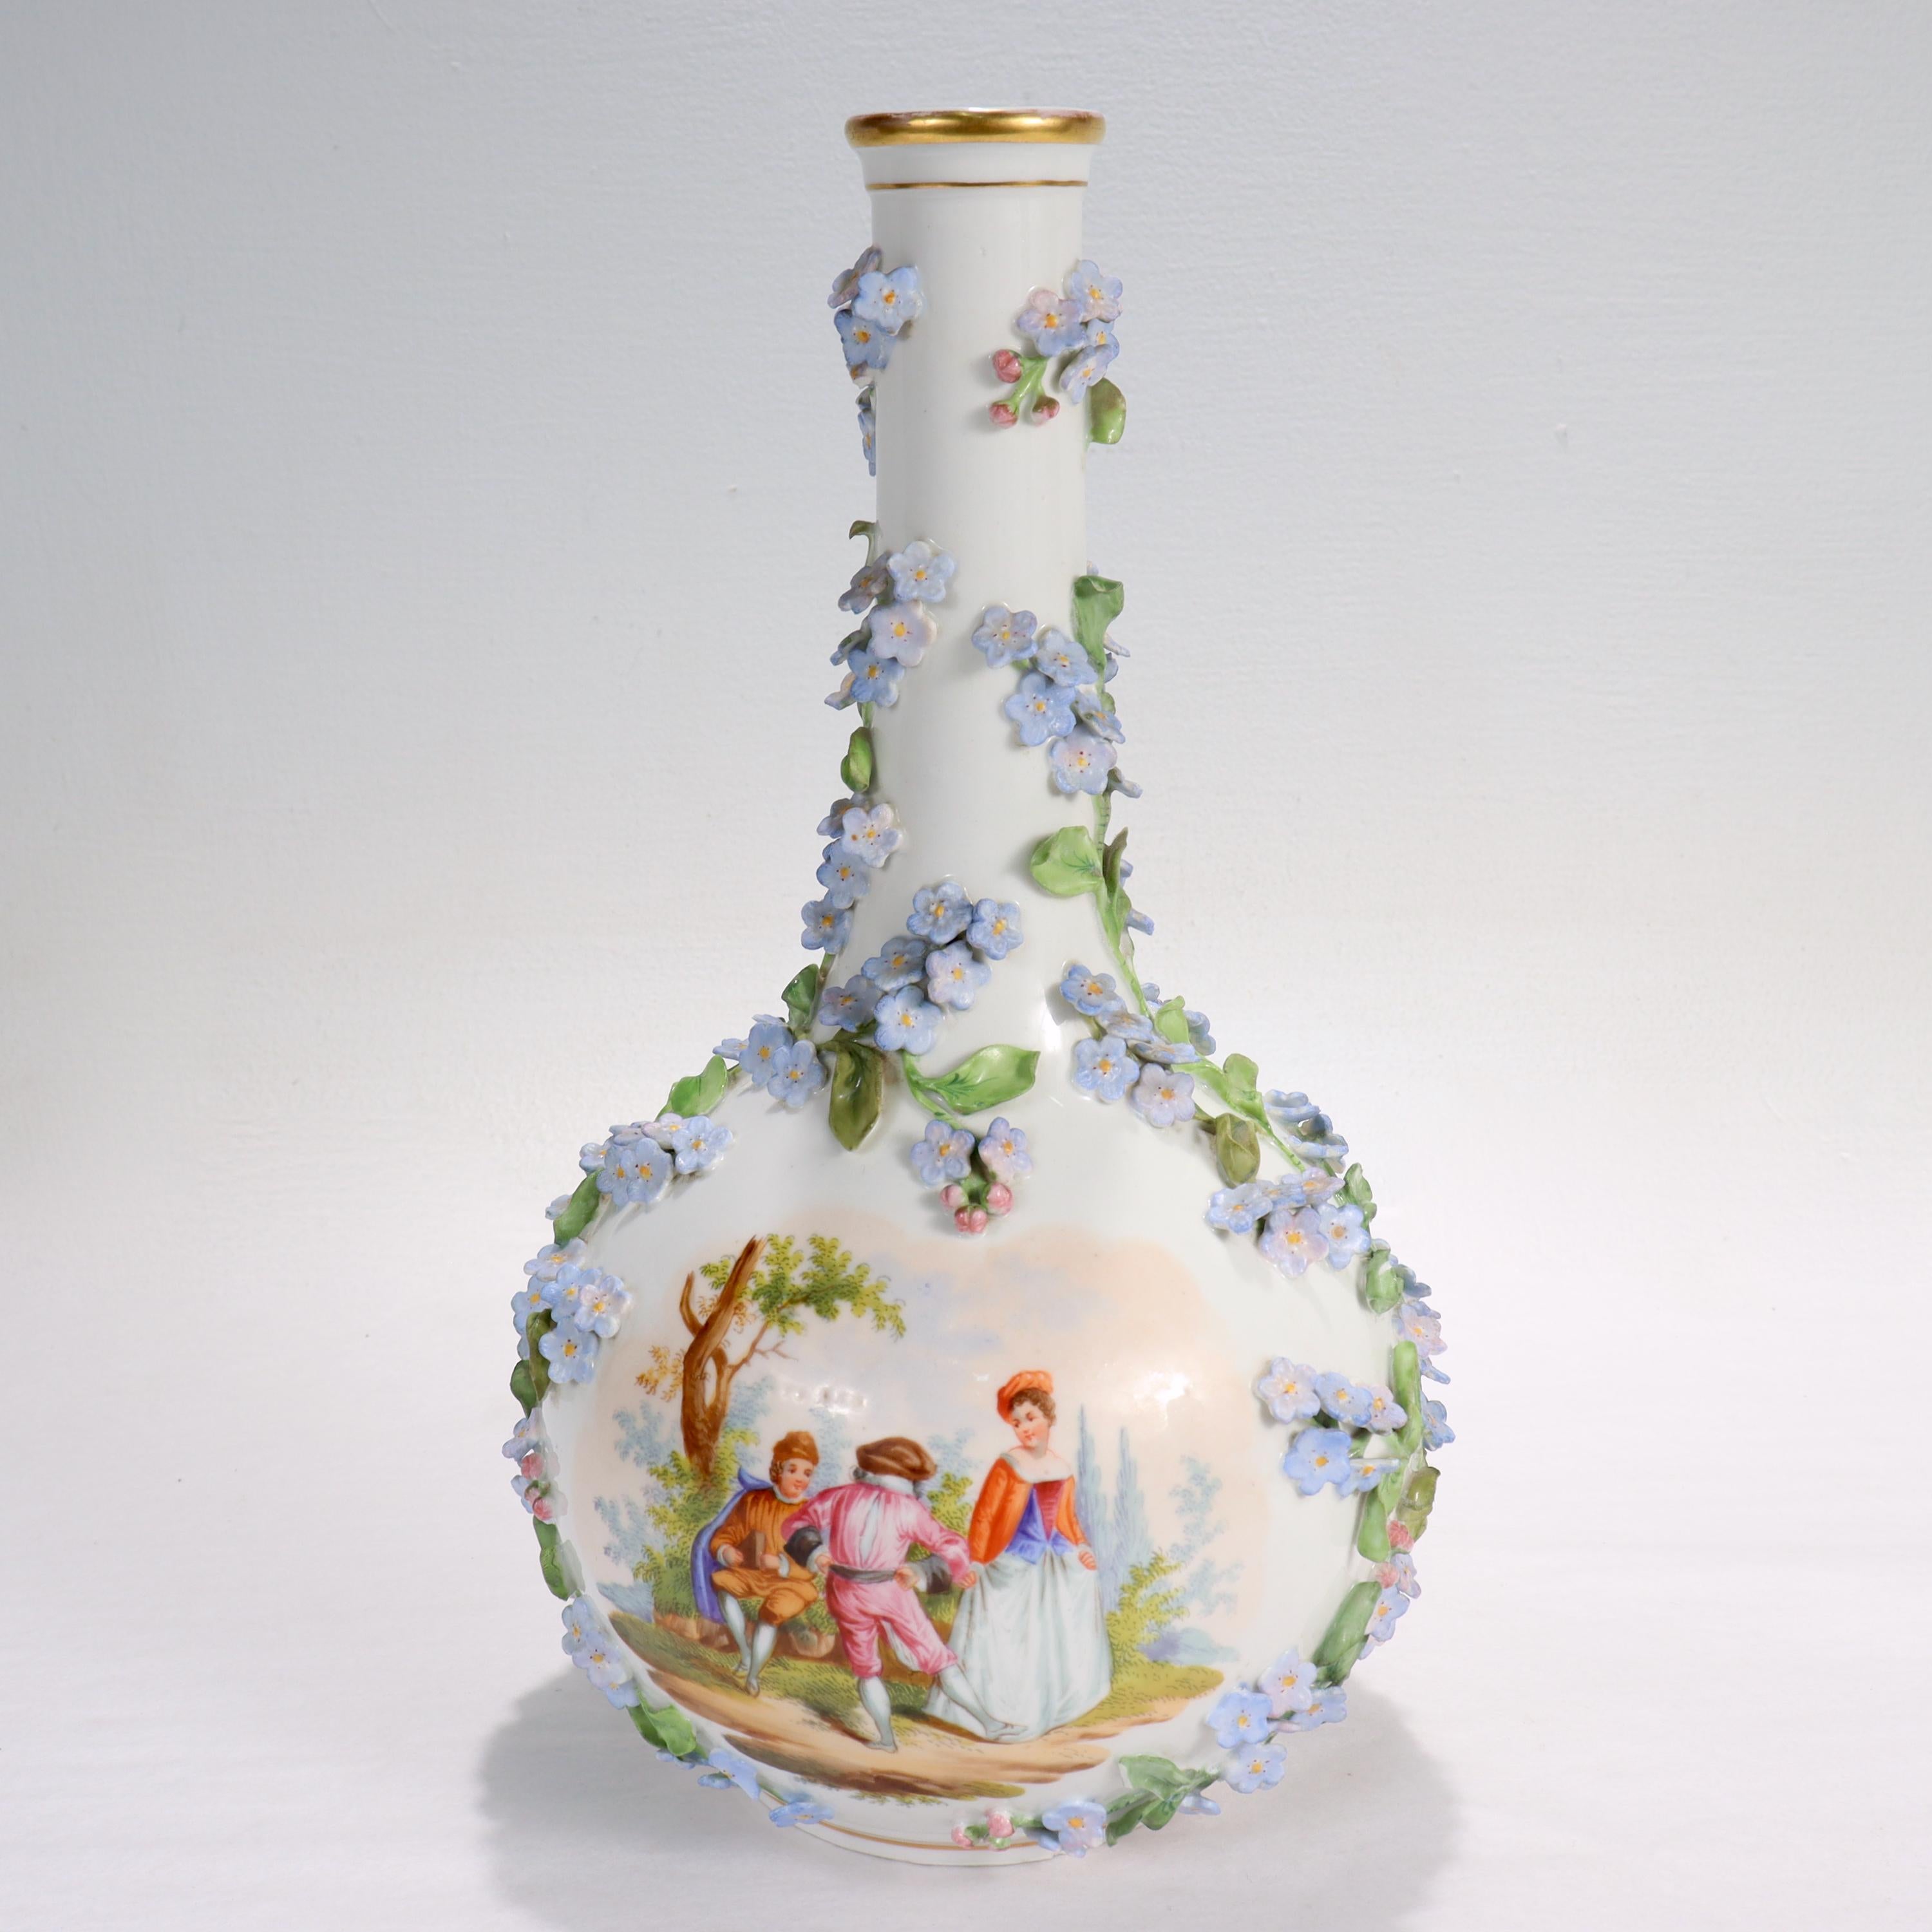 A fine antique Dresden porcelain vase.

By Thieme Potschappel.

Decorated throughout with encrusted porcelain flowers and painted scenes. One side of the bottle is painted with flowers, the other with a scene of 3 children in colonial/medieval